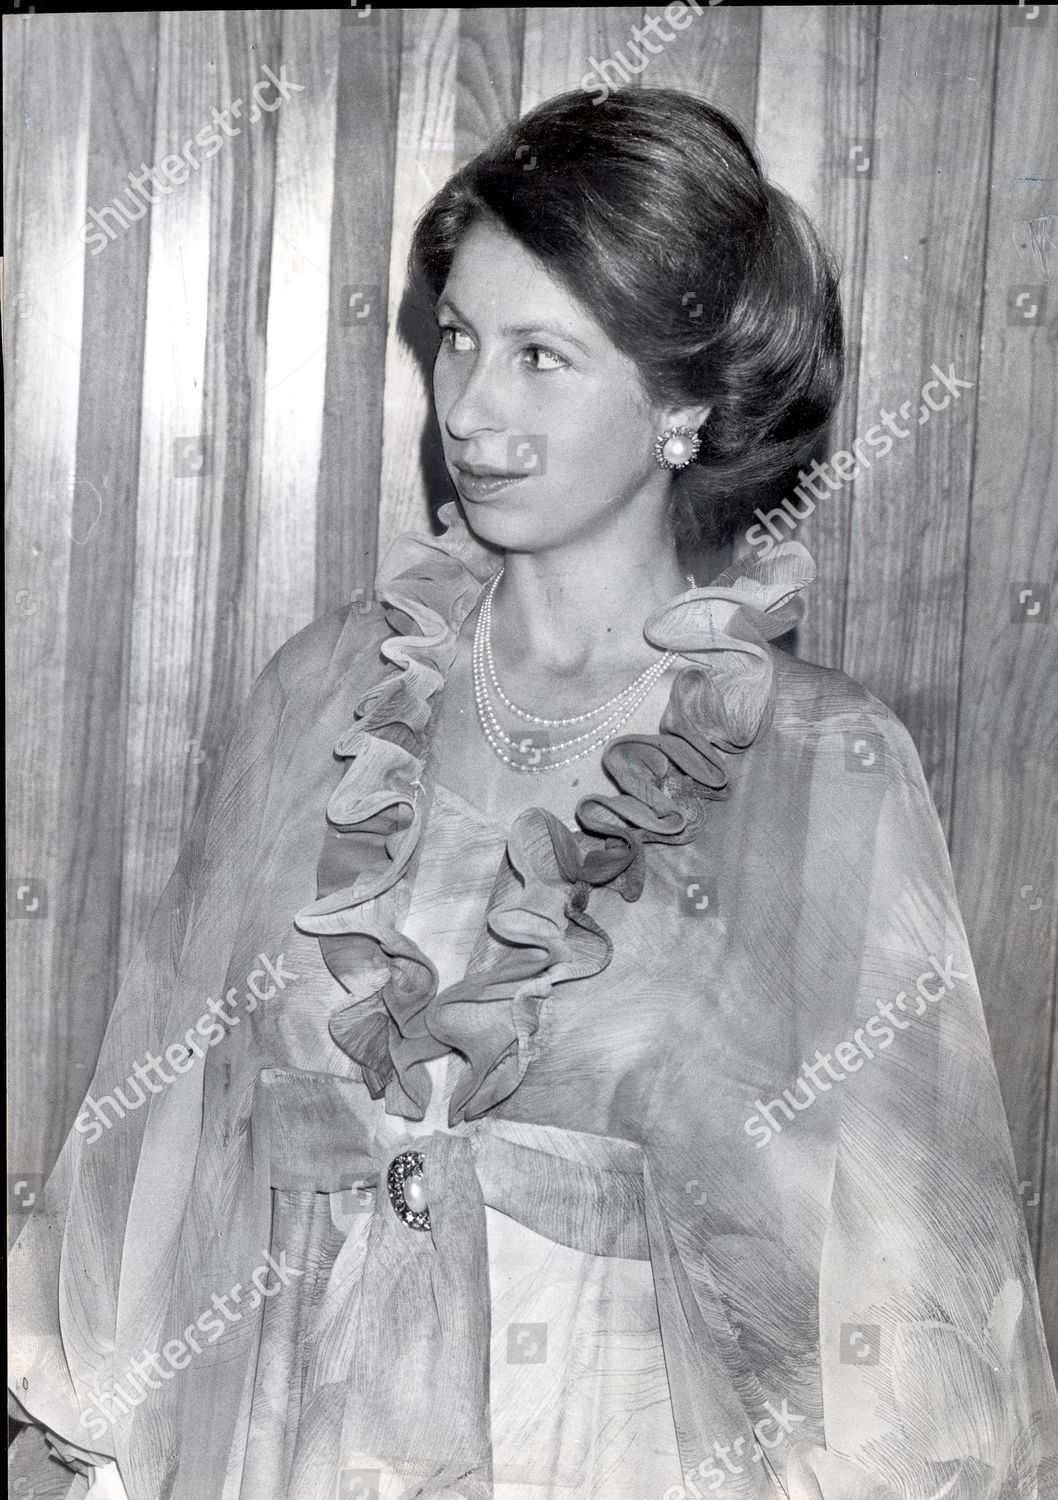 princess-anne-now-princess-royal-1977-picture-shows-princess-anne-arriving-at-the-royal-festival-hall-london-to-attend-a-jubilee-jazz-jamboree-shutterstock-editorial-891787a.jpg